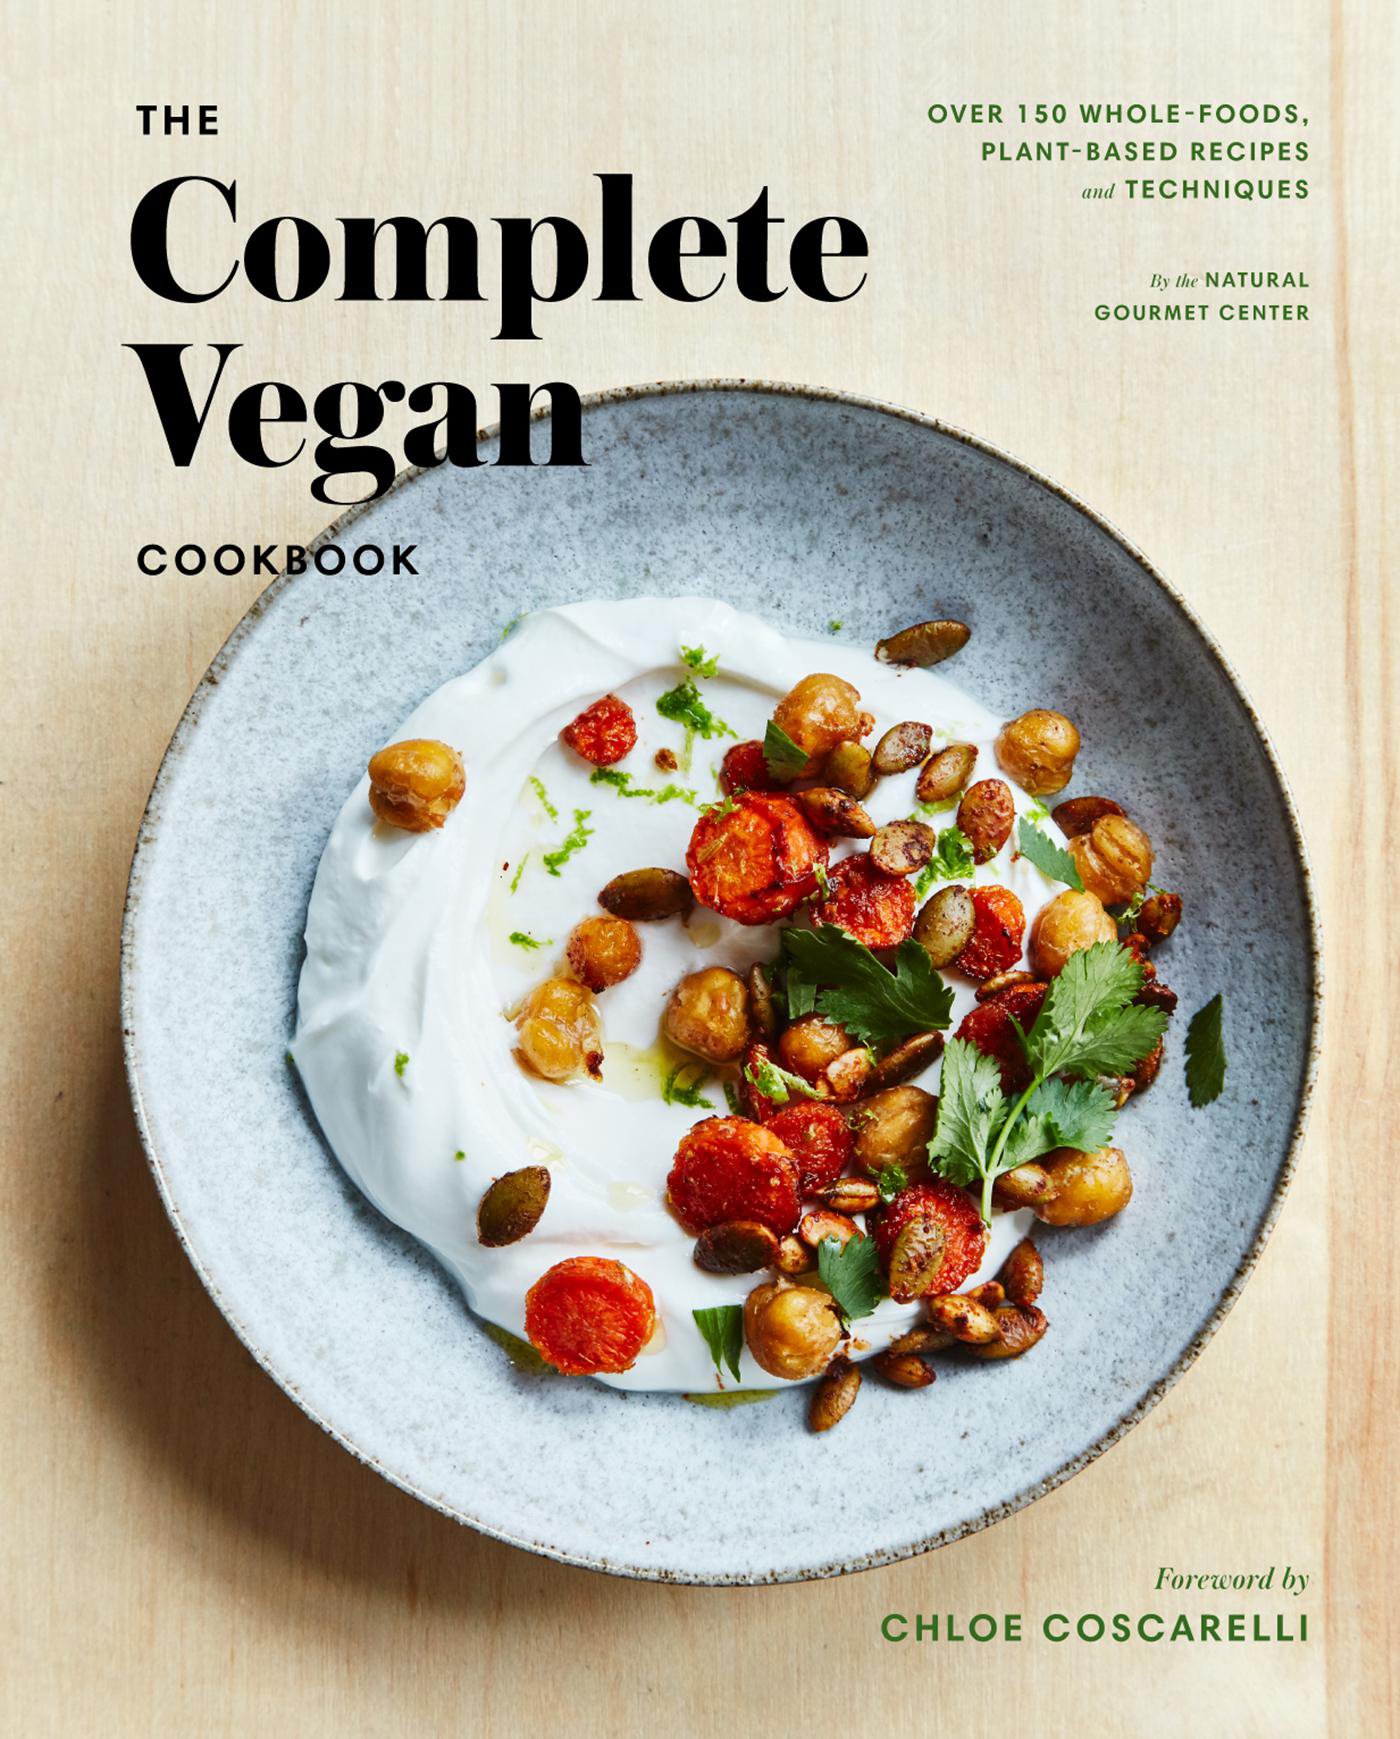 The Complete Vegan Cookbook Over 150 Whole Foods Plant Based Recipes